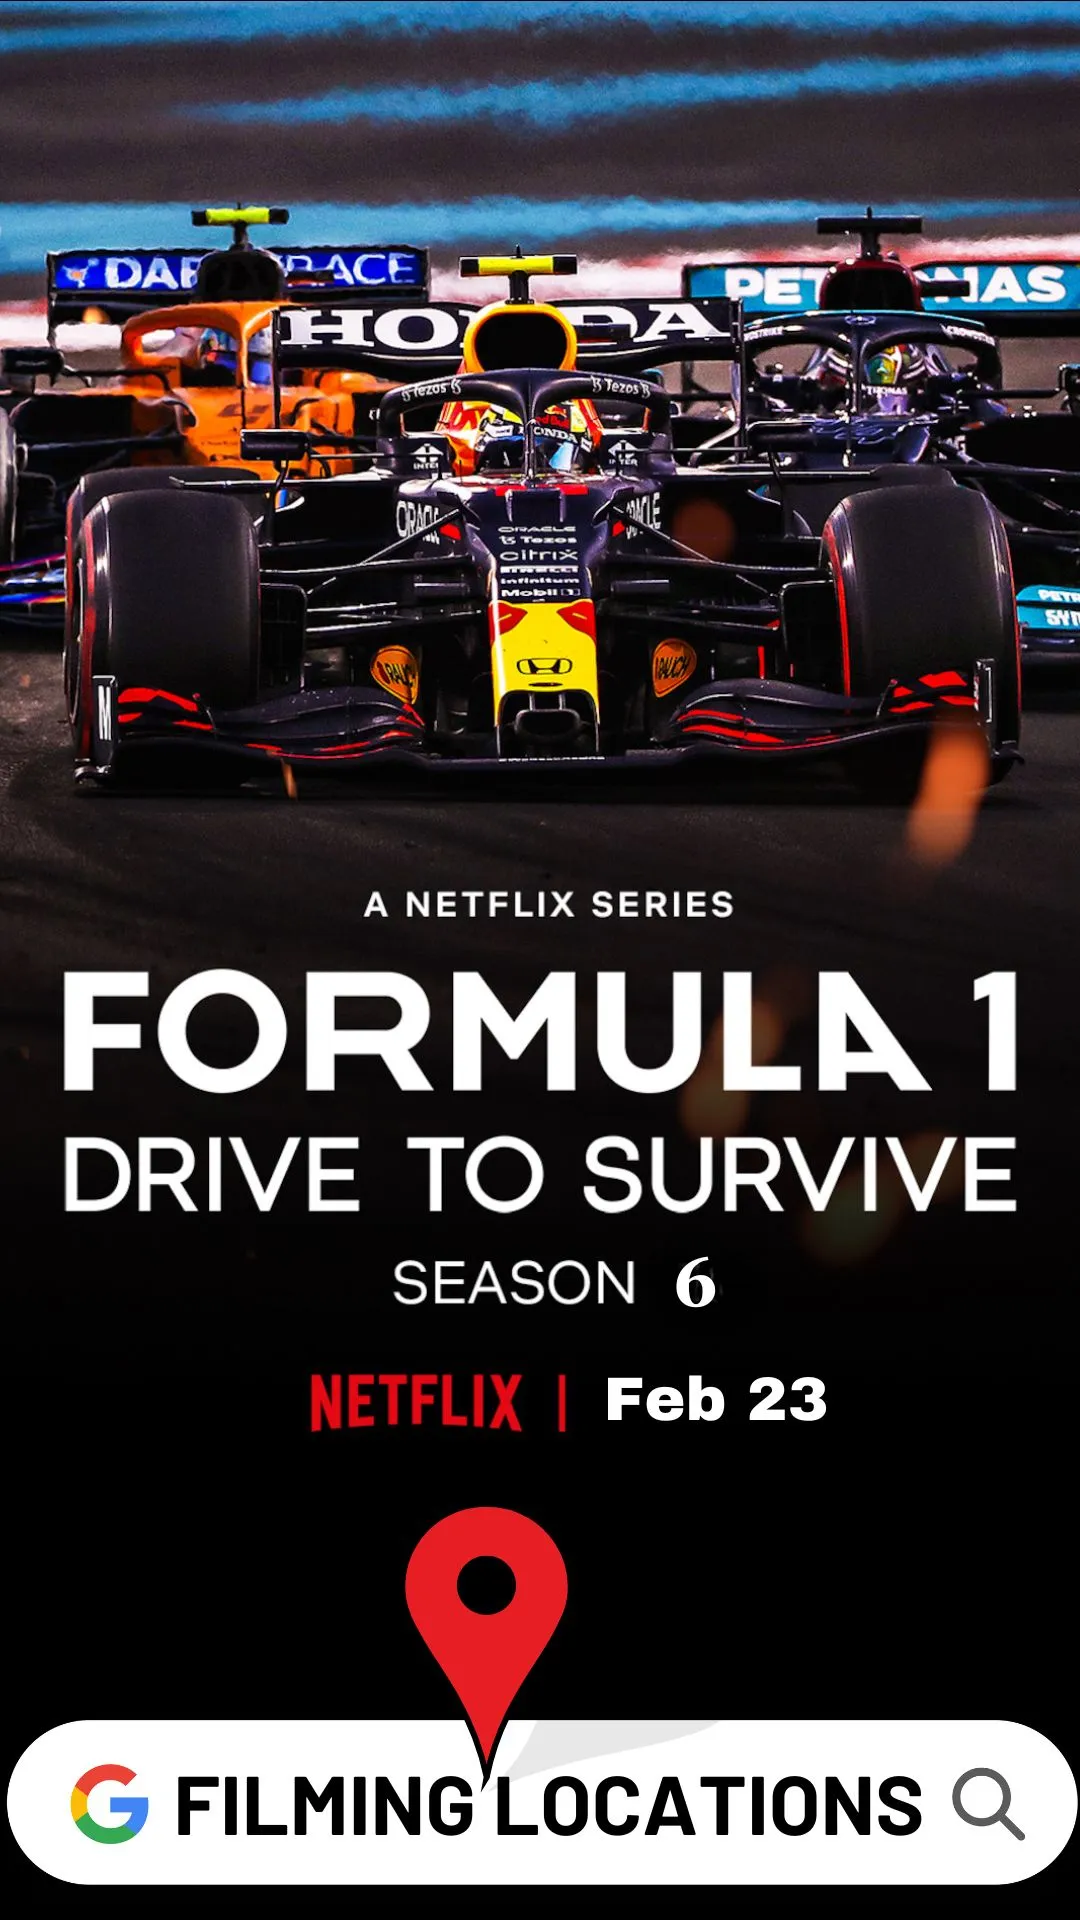 Where is Formula 1 Drive to Survive Filmed